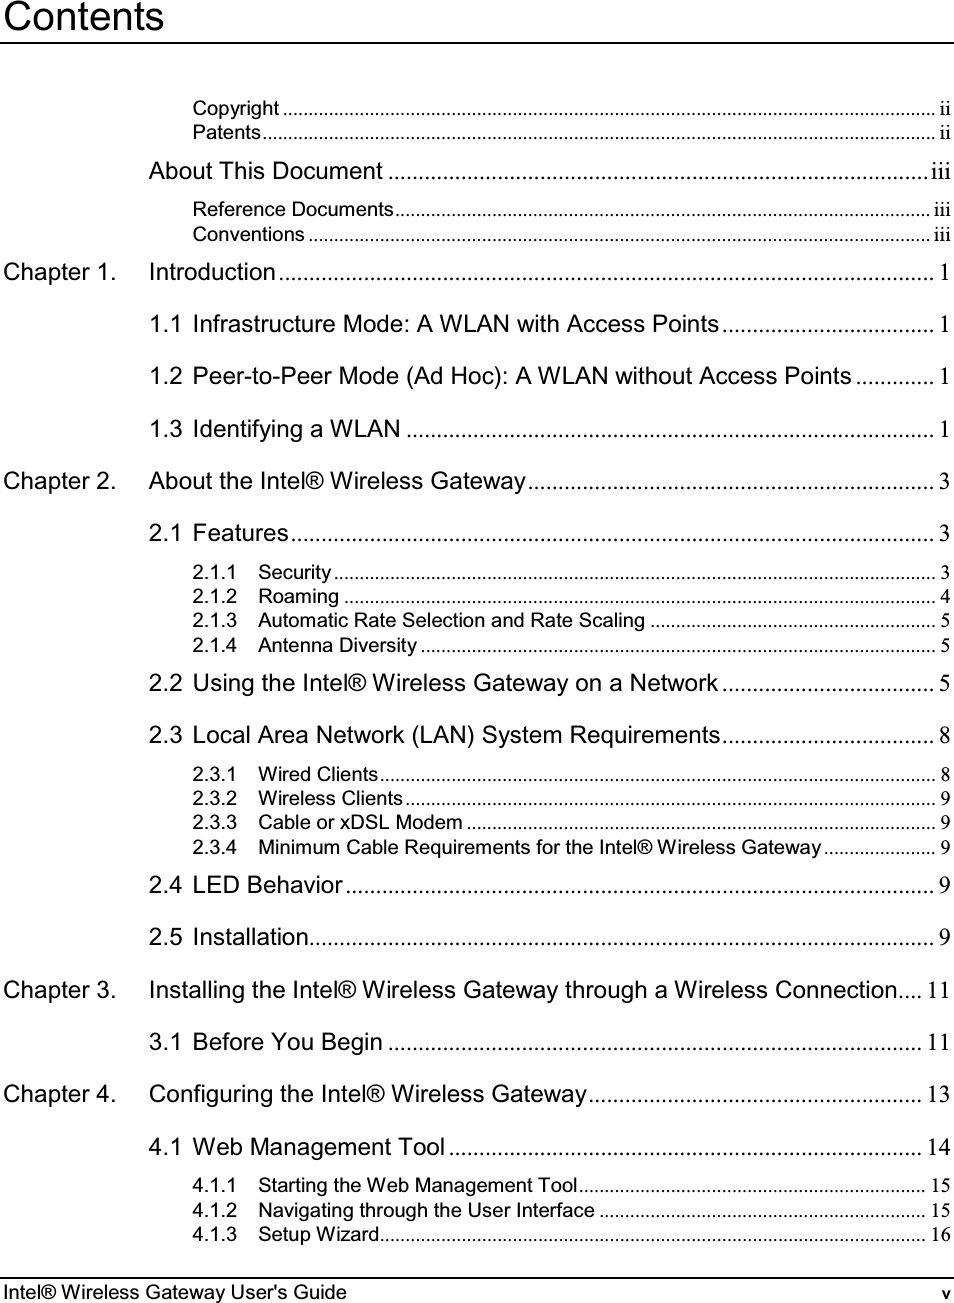  Intel® Wireless Gateway User&apos;s Guide  v Contents Copyright ................................................................................................................................ii Patents.................................................................................................................................... ii About This Document .........................................................................................iii Reference Documents......................................................................................................... iii Conventions .......................................................................................................................... iii Chapter 1. Introduction............................................................................................................ 1 1.1 Infrastructure Mode: A WLAN with Access Points................................... 1 1.2 Peer-to-Peer Mode (Ad Hoc): A WLAN without Access Points ............. 1 1.3 Identifying a WLAN ....................................................................................... 1 Chapter 2. About the Intel® Wireless Gateway................................................................... 3 2.1 Features.......................................................................................................... 3 2.1.1 Security ...................................................................................................................... 3 2.1.2 Roaming .................................................................................................................... 4 2.1.3 Automatic Rate Selection and Rate Scaling ........................................................ 5 2.1.4 Antenna Diversity ..................................................................................................... 5 2.2 Using the Intel® Wireless Gateway on a Network ................................... 5 2.3 Local Area Network (LAN) System Requirements................................... 8 2.3.1 Wired Clients............................................................................................................. 8 2.3.2 Wireless Clients........................................................................................................ 9 2.3.3 Cable or xDSL Modem ............................................................................................ 9 2.3.4 Minimum Cable Requirements for the Intel® Wireless Gateway...................... 9 2.4 LED Behavior................................................................................................. 9 2.5 Installation....................................................................................................... 9 Chapter 3. Installing the Intel® Wireless Gateway through a Wireless Connection.... 11 3.1 Before You Begin ........................................................................................ 11 Chapter 4. Configuring the Intel® Wireless Gateway....................................................... 13 4.1 Web Management Tool .............................................................................. 14 4.1.1 Starting the Web Management Tool.................................................................... 15 4.1.2 Navigating through the User Interface ................................................................ 15 4.1.3 Setup Wizard........................................................................................................... 16 